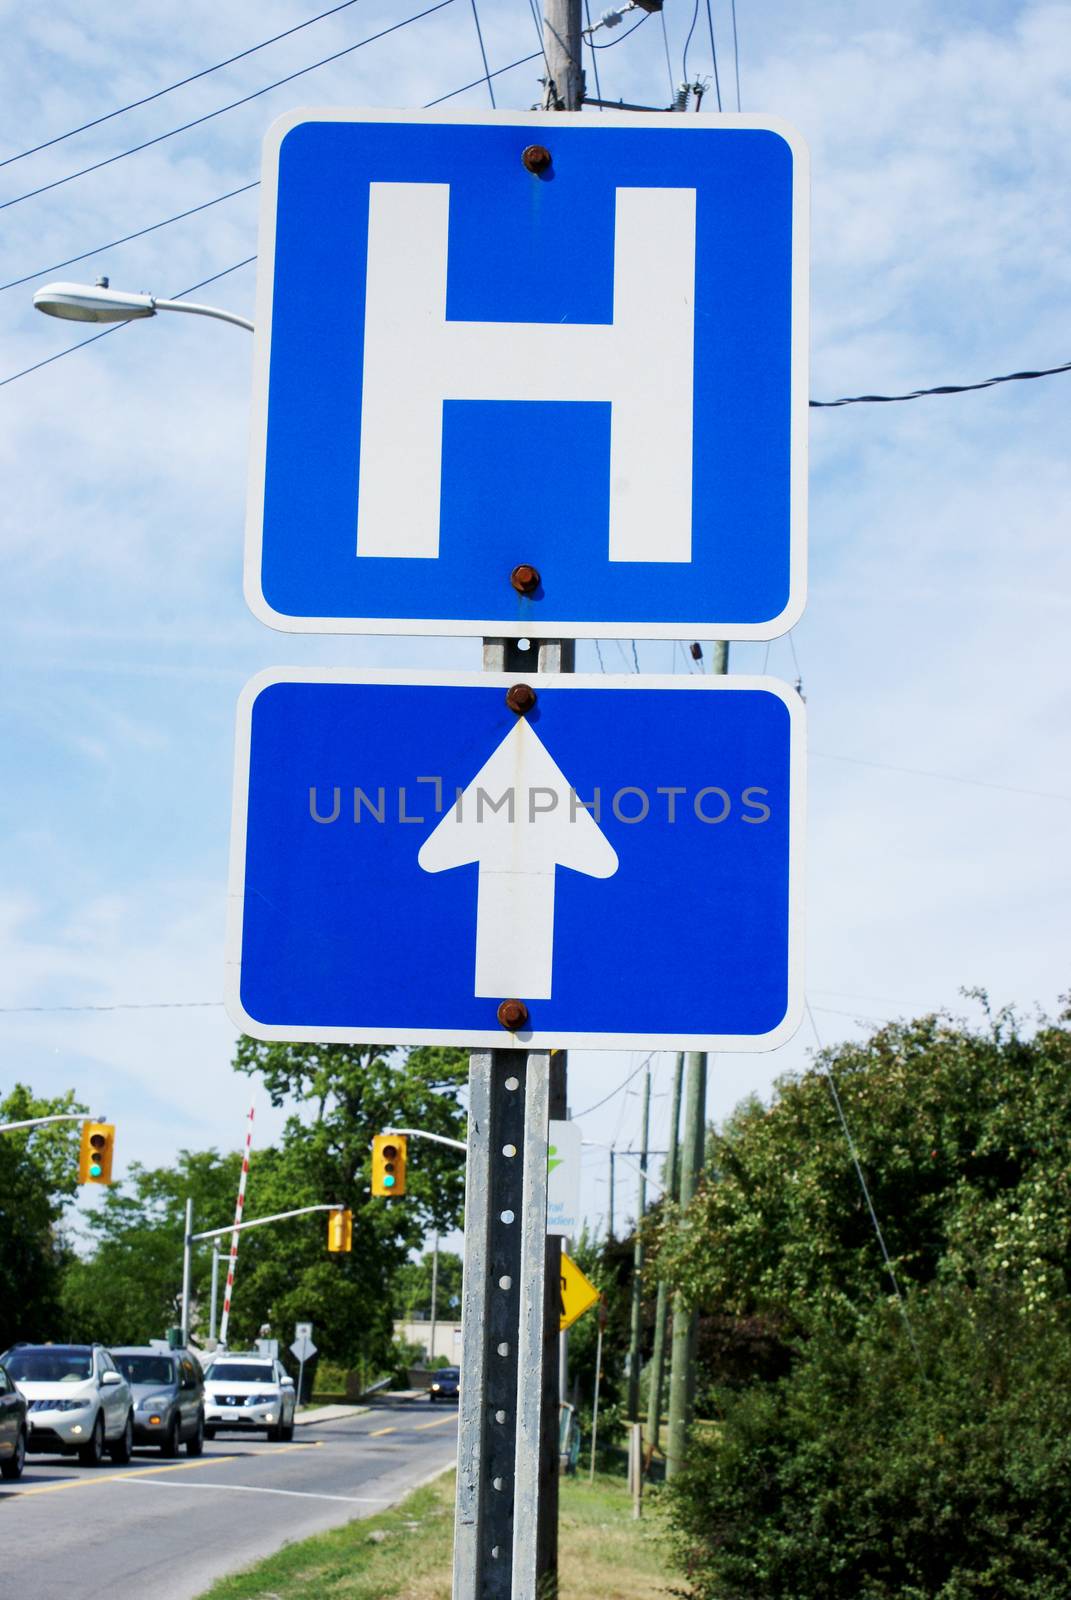 A Canadian hospital direction street sign used in traffic law and order.